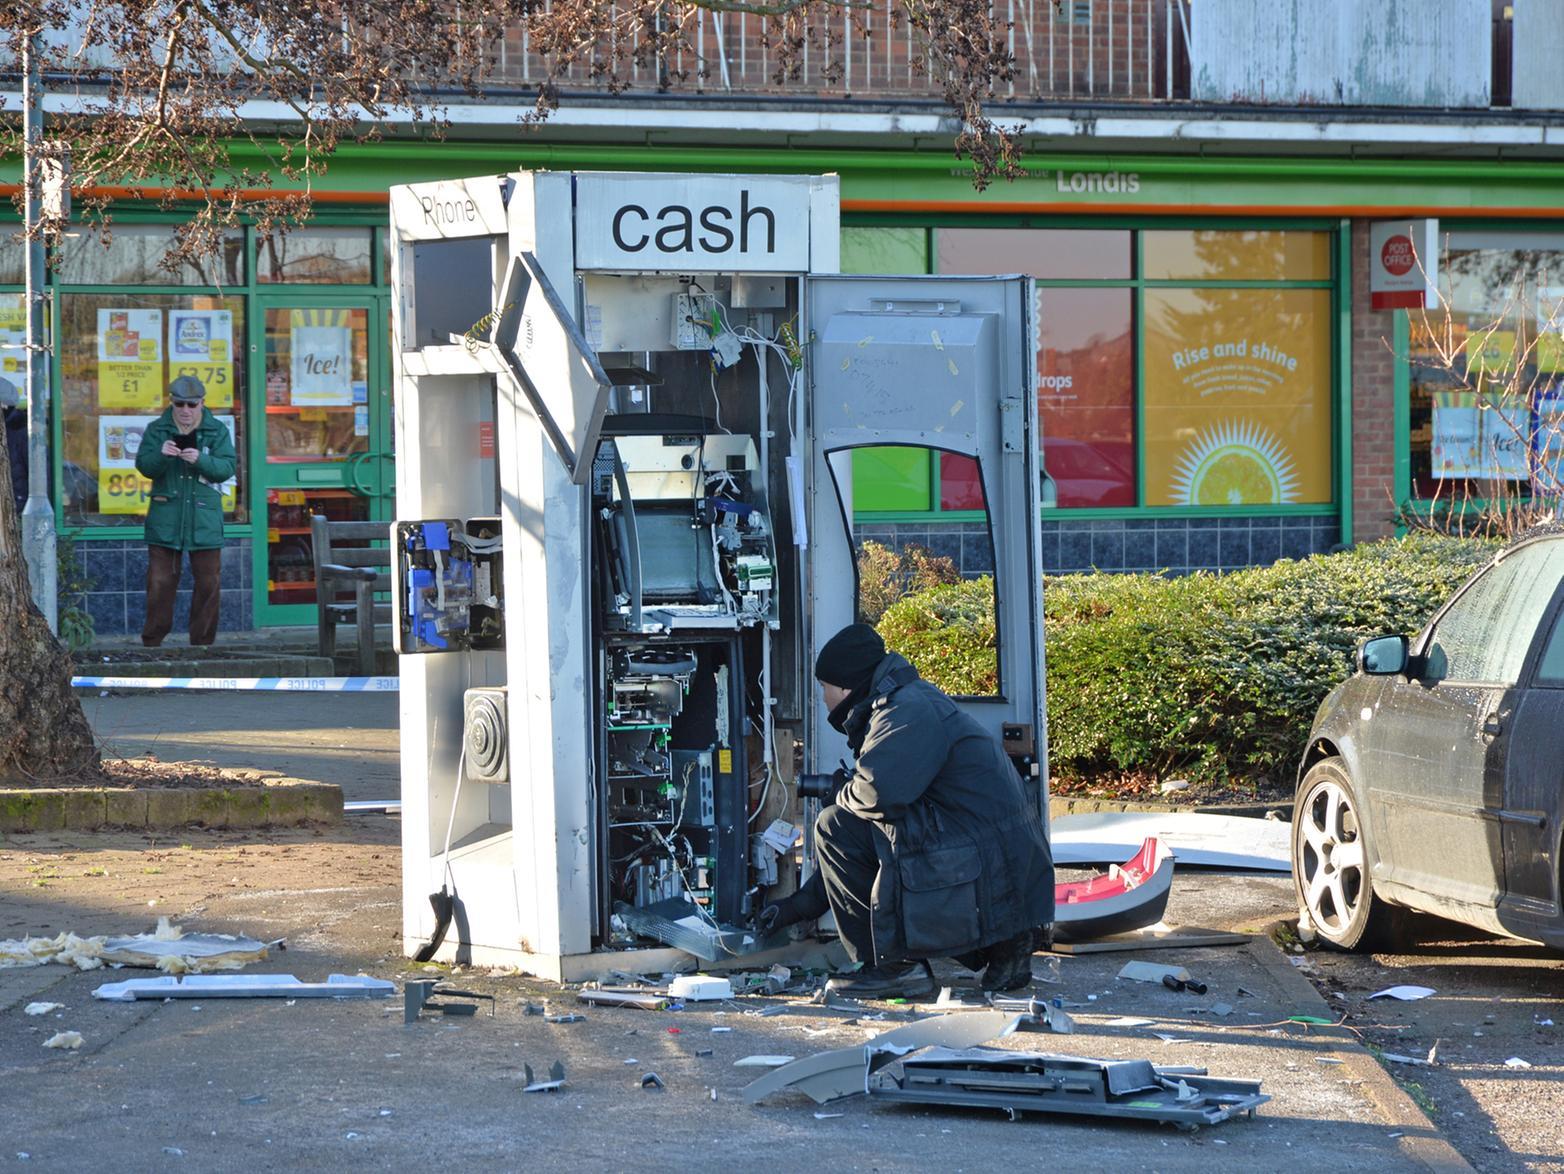 This was the aftermath after a cash point in Market Harborough was blown apart in raid by thieves. The stand-alone unit in Western Avenue, near to the Royalist pub and small row of shops was targeted at around 1.30am on Wednesday, January 30. It is thought that a gas canister was used to blow open the cash point. It was not the first cash point to be targeted in the Harborough district.